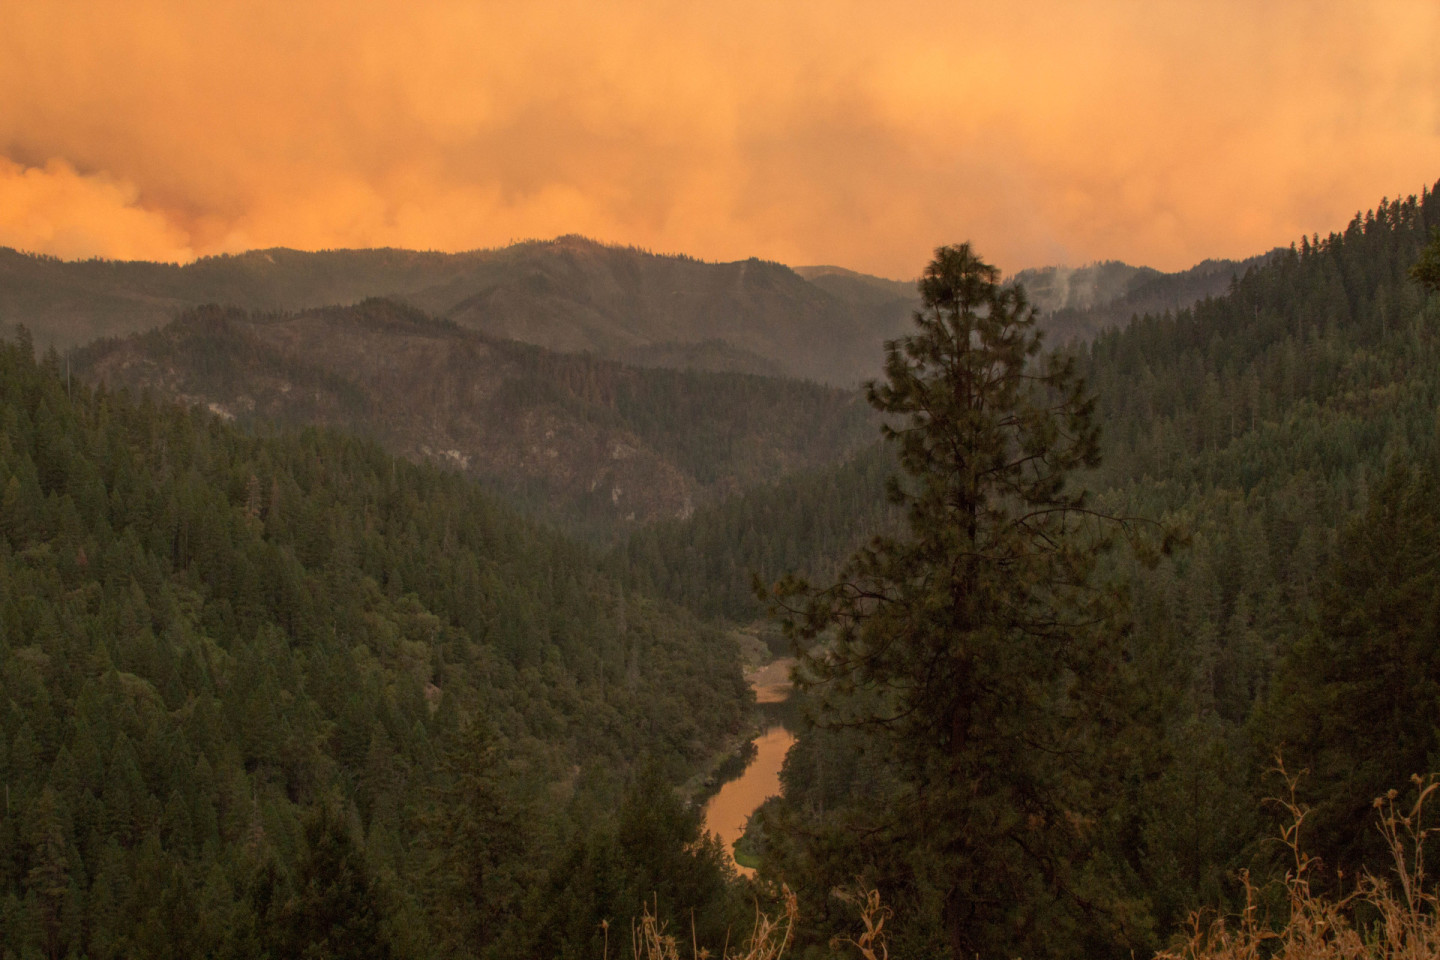 The Frying Pan Fire, burning in the mountains south of the Klamath River in Siskiyou County, as seen from Highway 96 east of the town of Happy Camp in late August 2014. The fire was one of a series sparked by lightning that federal fire managers have dubbed the Happy Camp Complex. The U.S. Forest Service announced Tuesday that a handful of "holdover" hotspots had reignited due to extreme heat and drought conditions. Dan Brekke/KQED